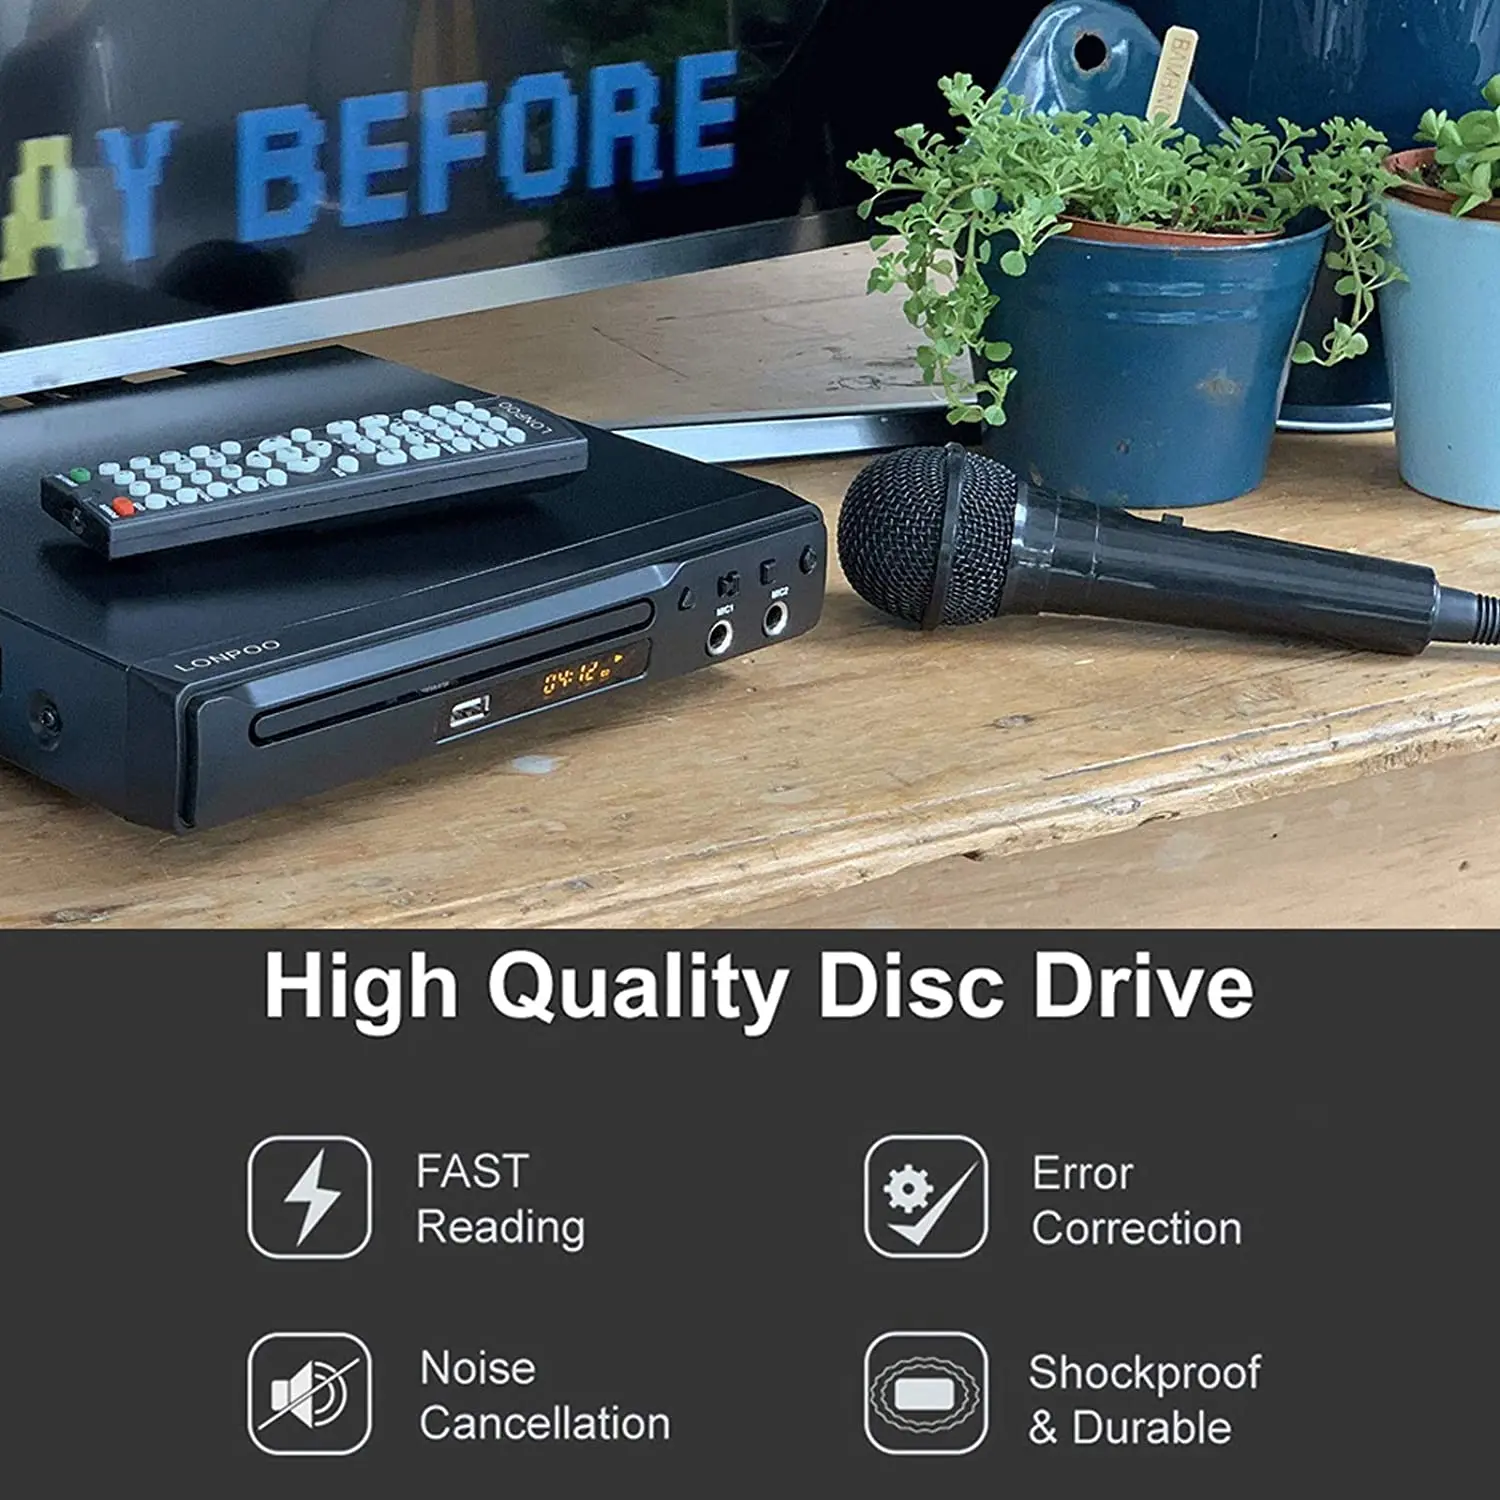 Lonpoo Home Use Region Free Hd Dvd Player Cd Player With Karaoke Jack - Buy  Dvd Player,Dvd Player Home,Home Dvd Player Product on Alibaba.com